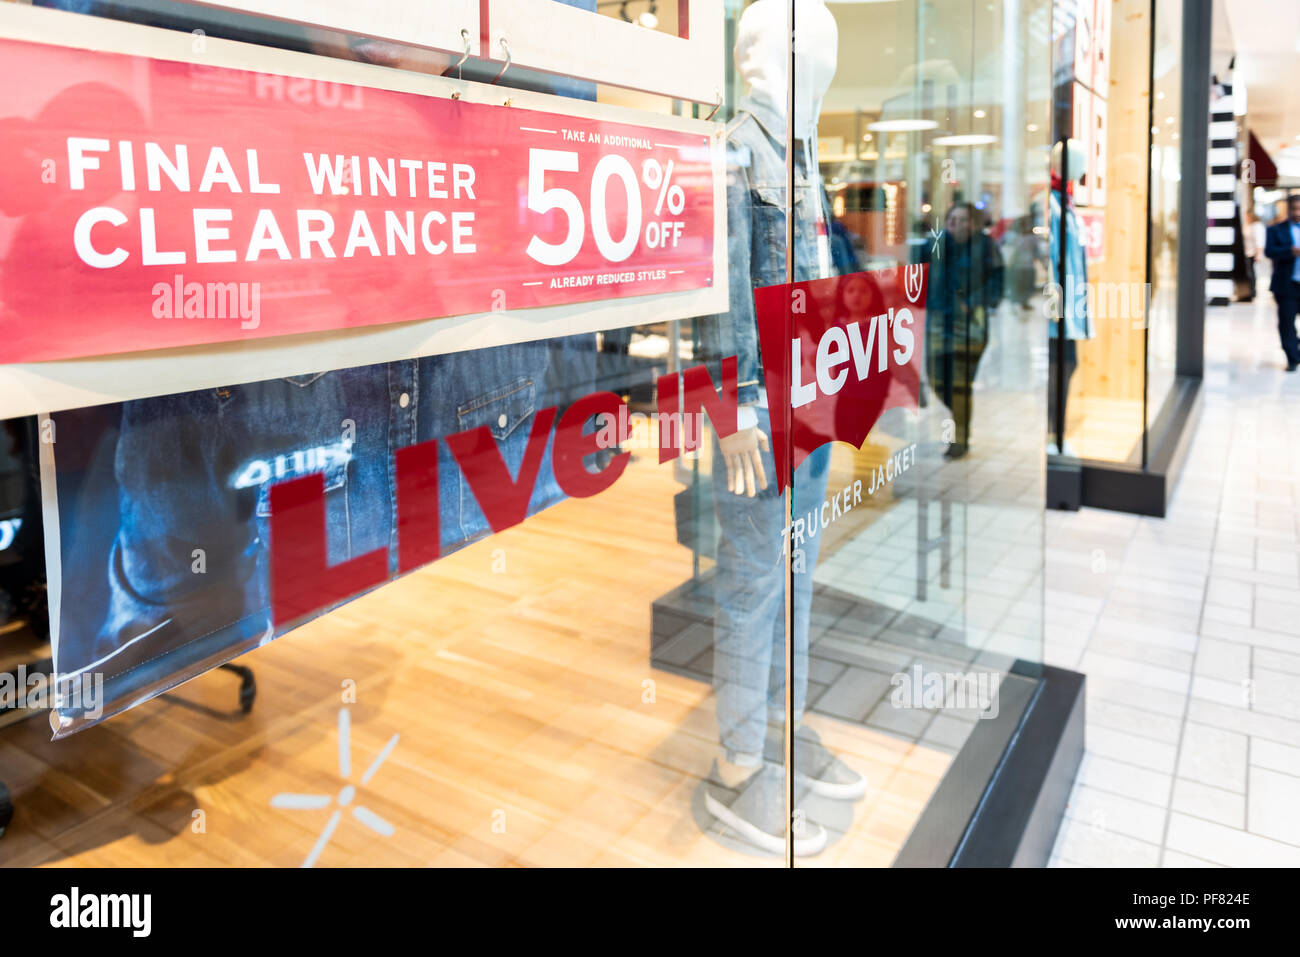 Tysons Corner, USA - January 26, 2018: Levi's, Levis denim jeans store,  shop with final winter clearance sale, 50% off sign on glass window, door  entr Stock Photo - Alamy